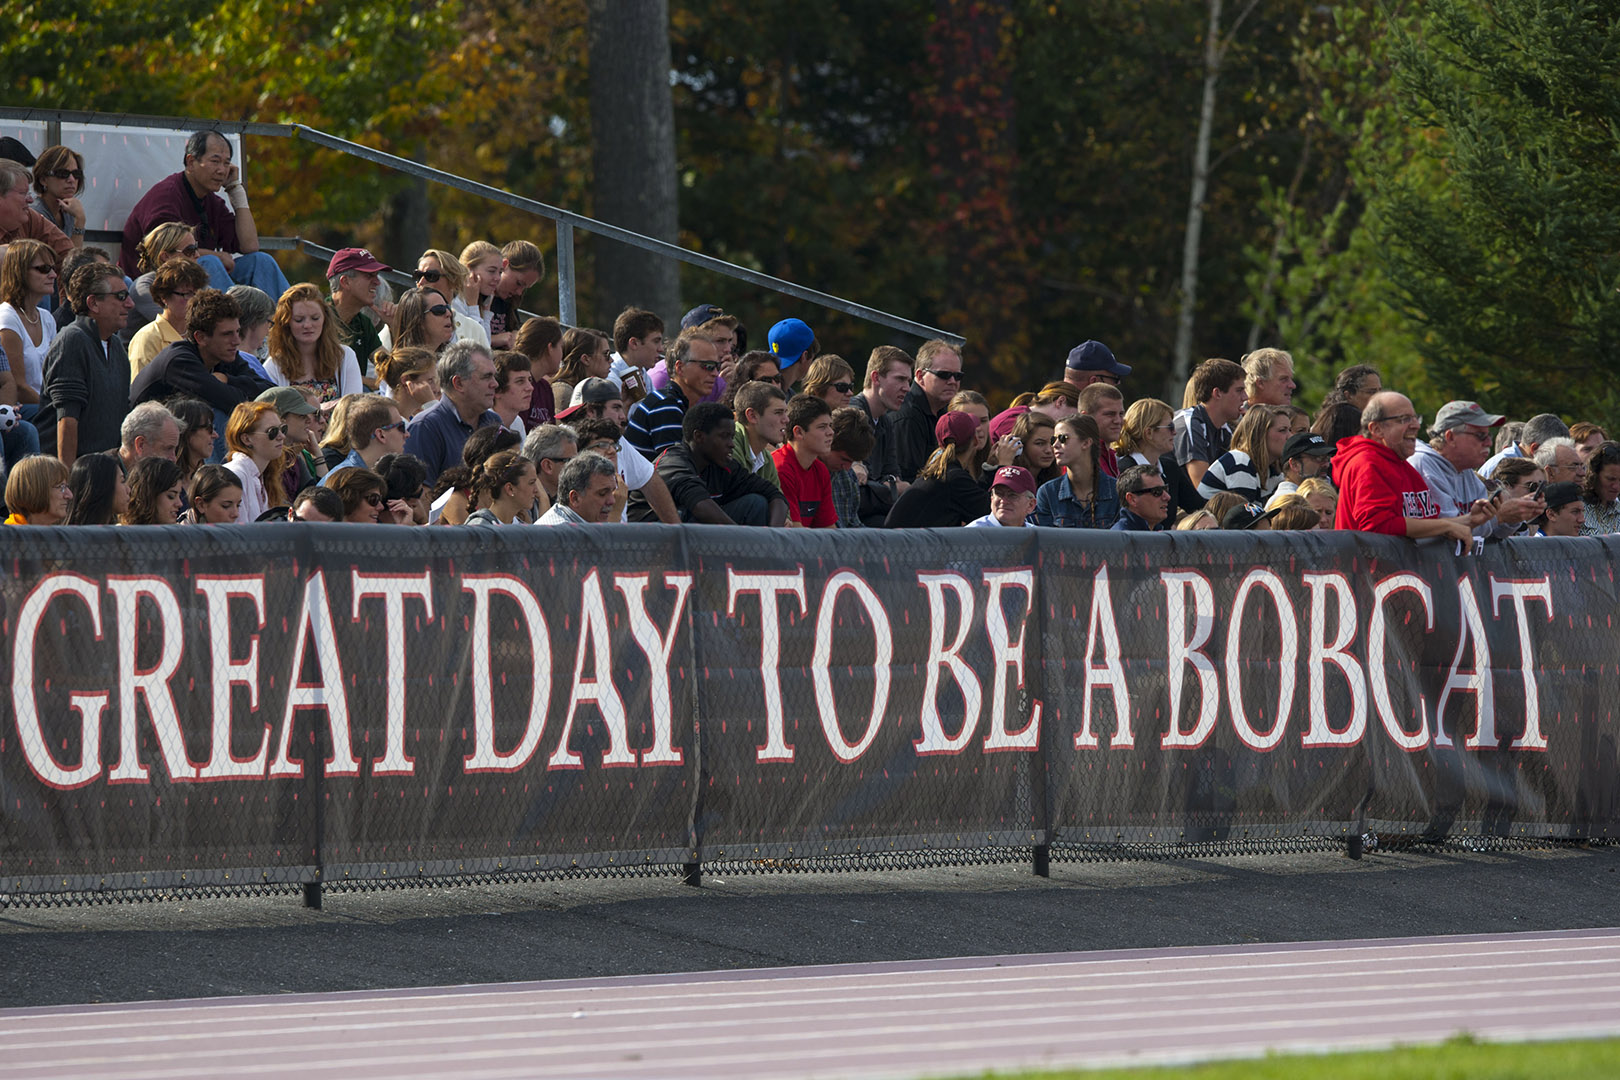 Revealed: Who coined the distinctive Bates cheer ‘Great day to be a Bobcat’?